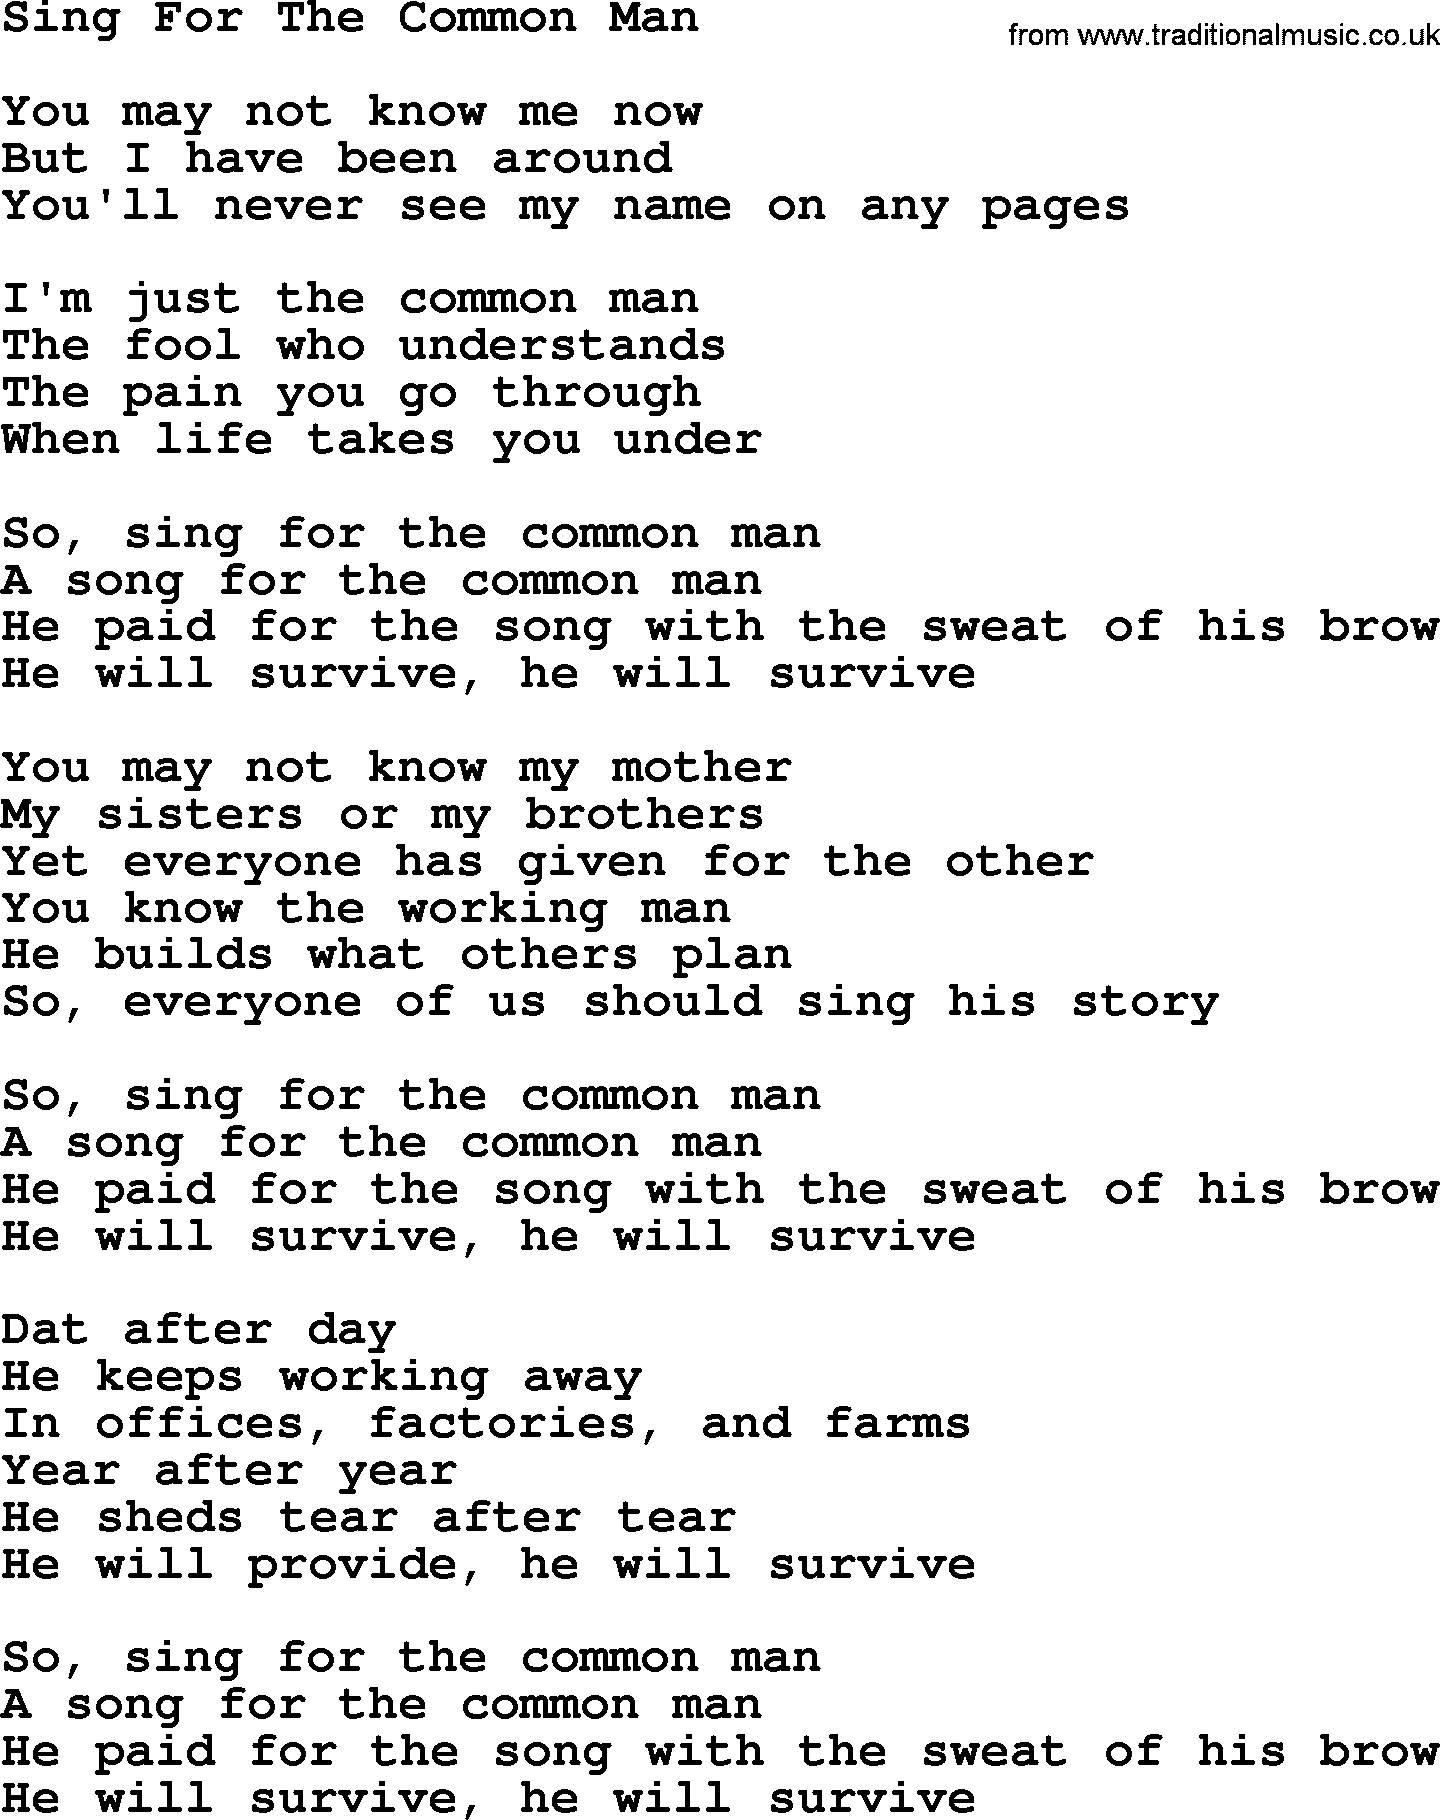 Dolly Parton song Sing For The Common Man.txt lyrics